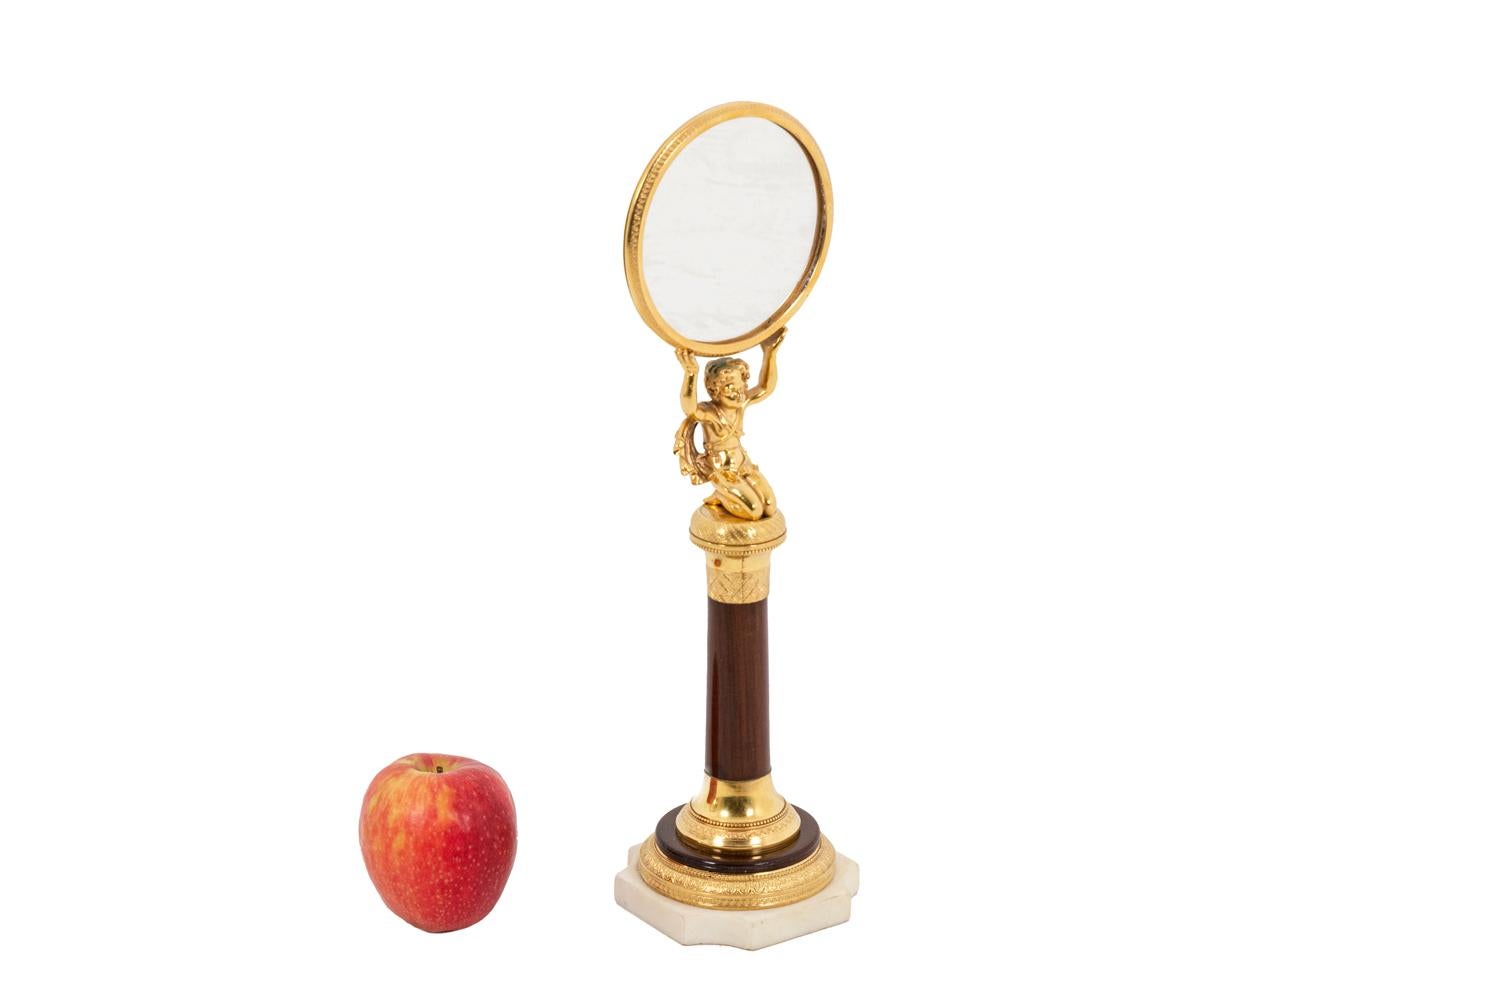 Little oval-shaped mirror in rosewood and gilt bronze standing on a tubular structure. Frame in gilt bronze. Figure of a child on its knees supporting the mirror with his two spared arms. Molded base in wood and chiseled and gilt bronze. Octagonal